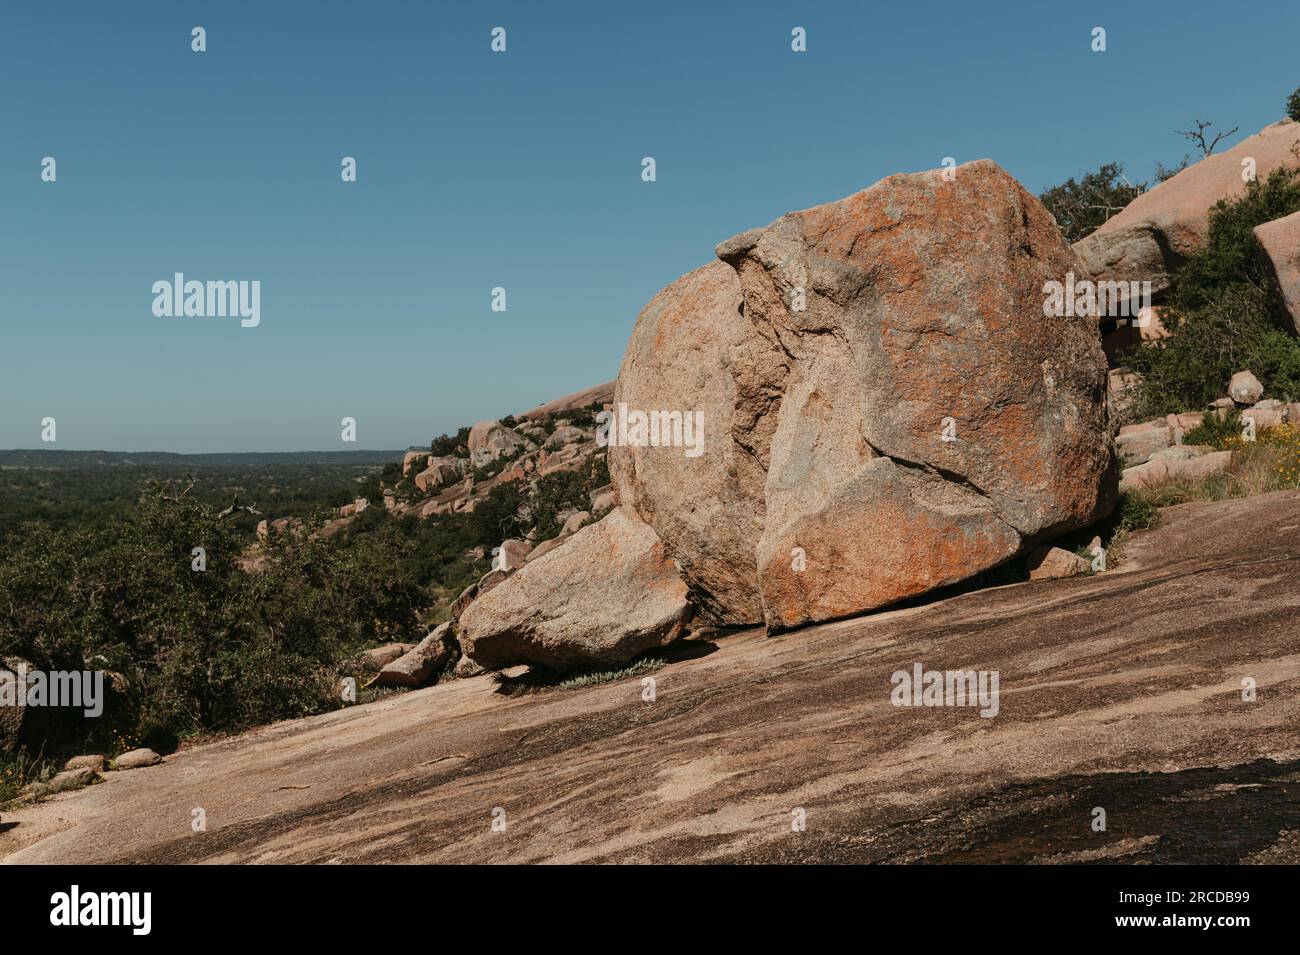 Boulders at Enchanted Rock State Natural Area in Texas Stock Photo